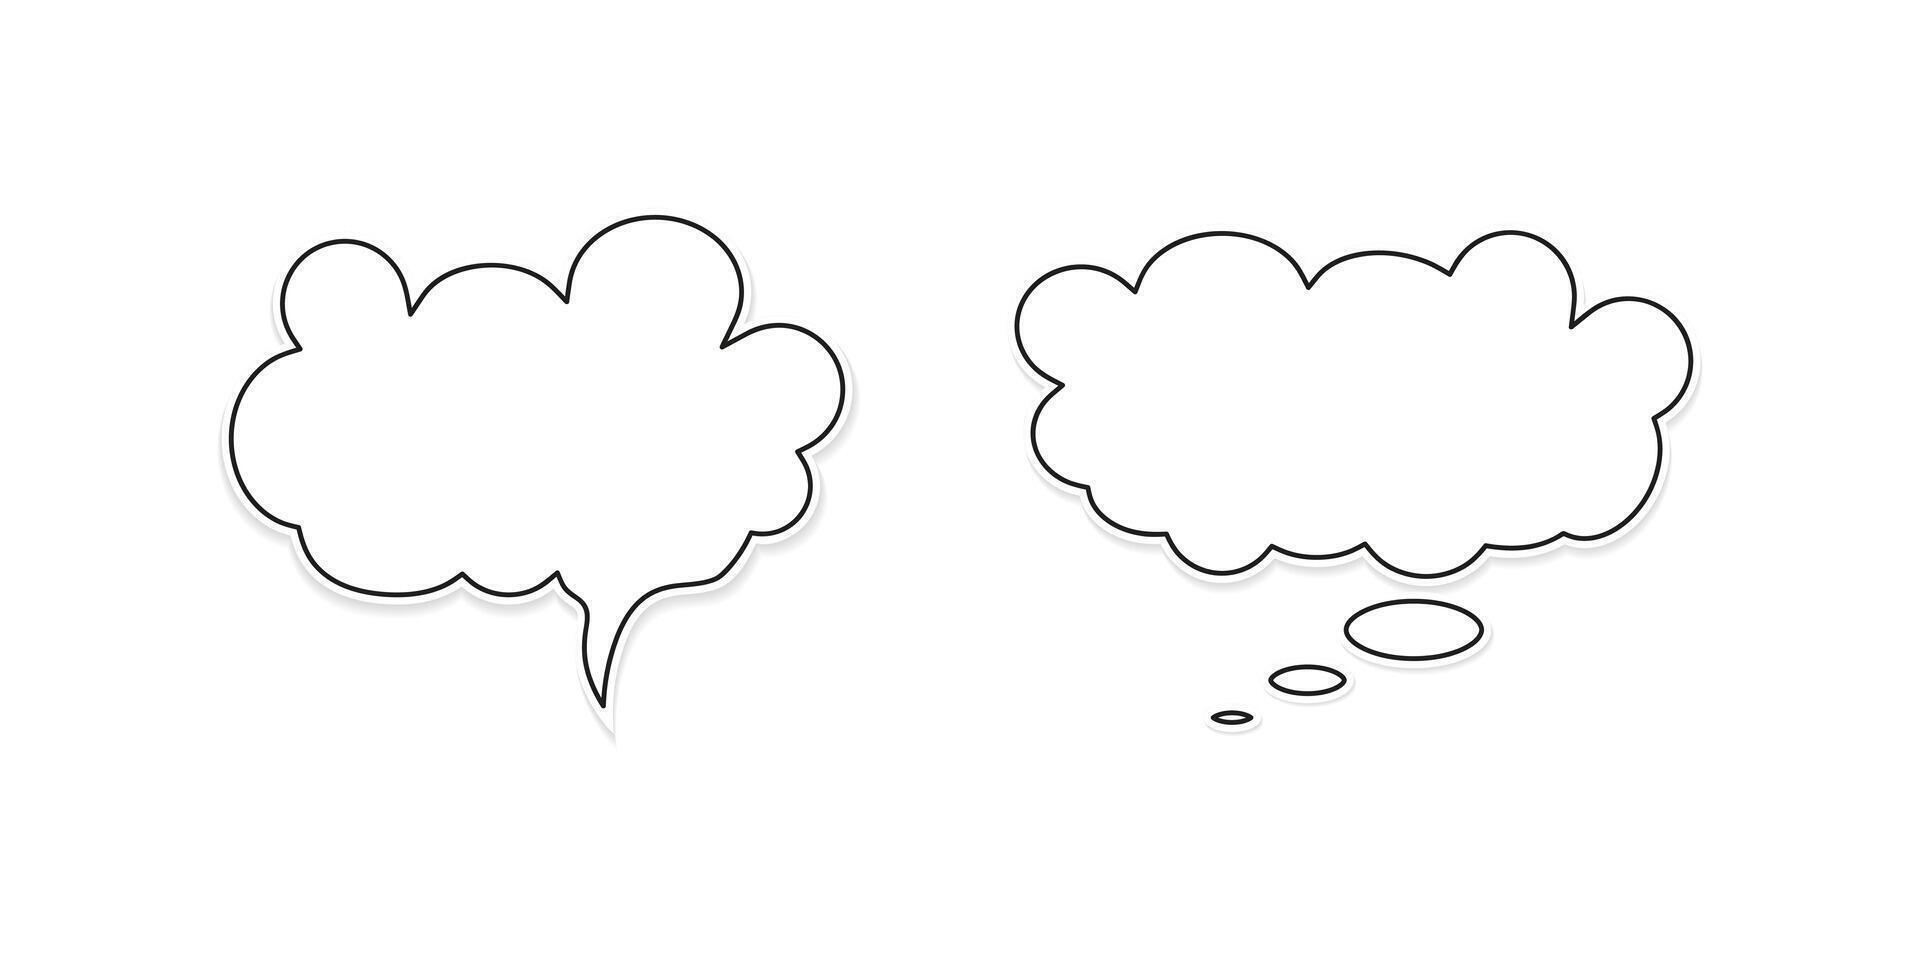 Comic speech bubble. Blank text box in cartoon style. Speech bubble cloud design for text, thoughts, conversation, message, dialog. vector